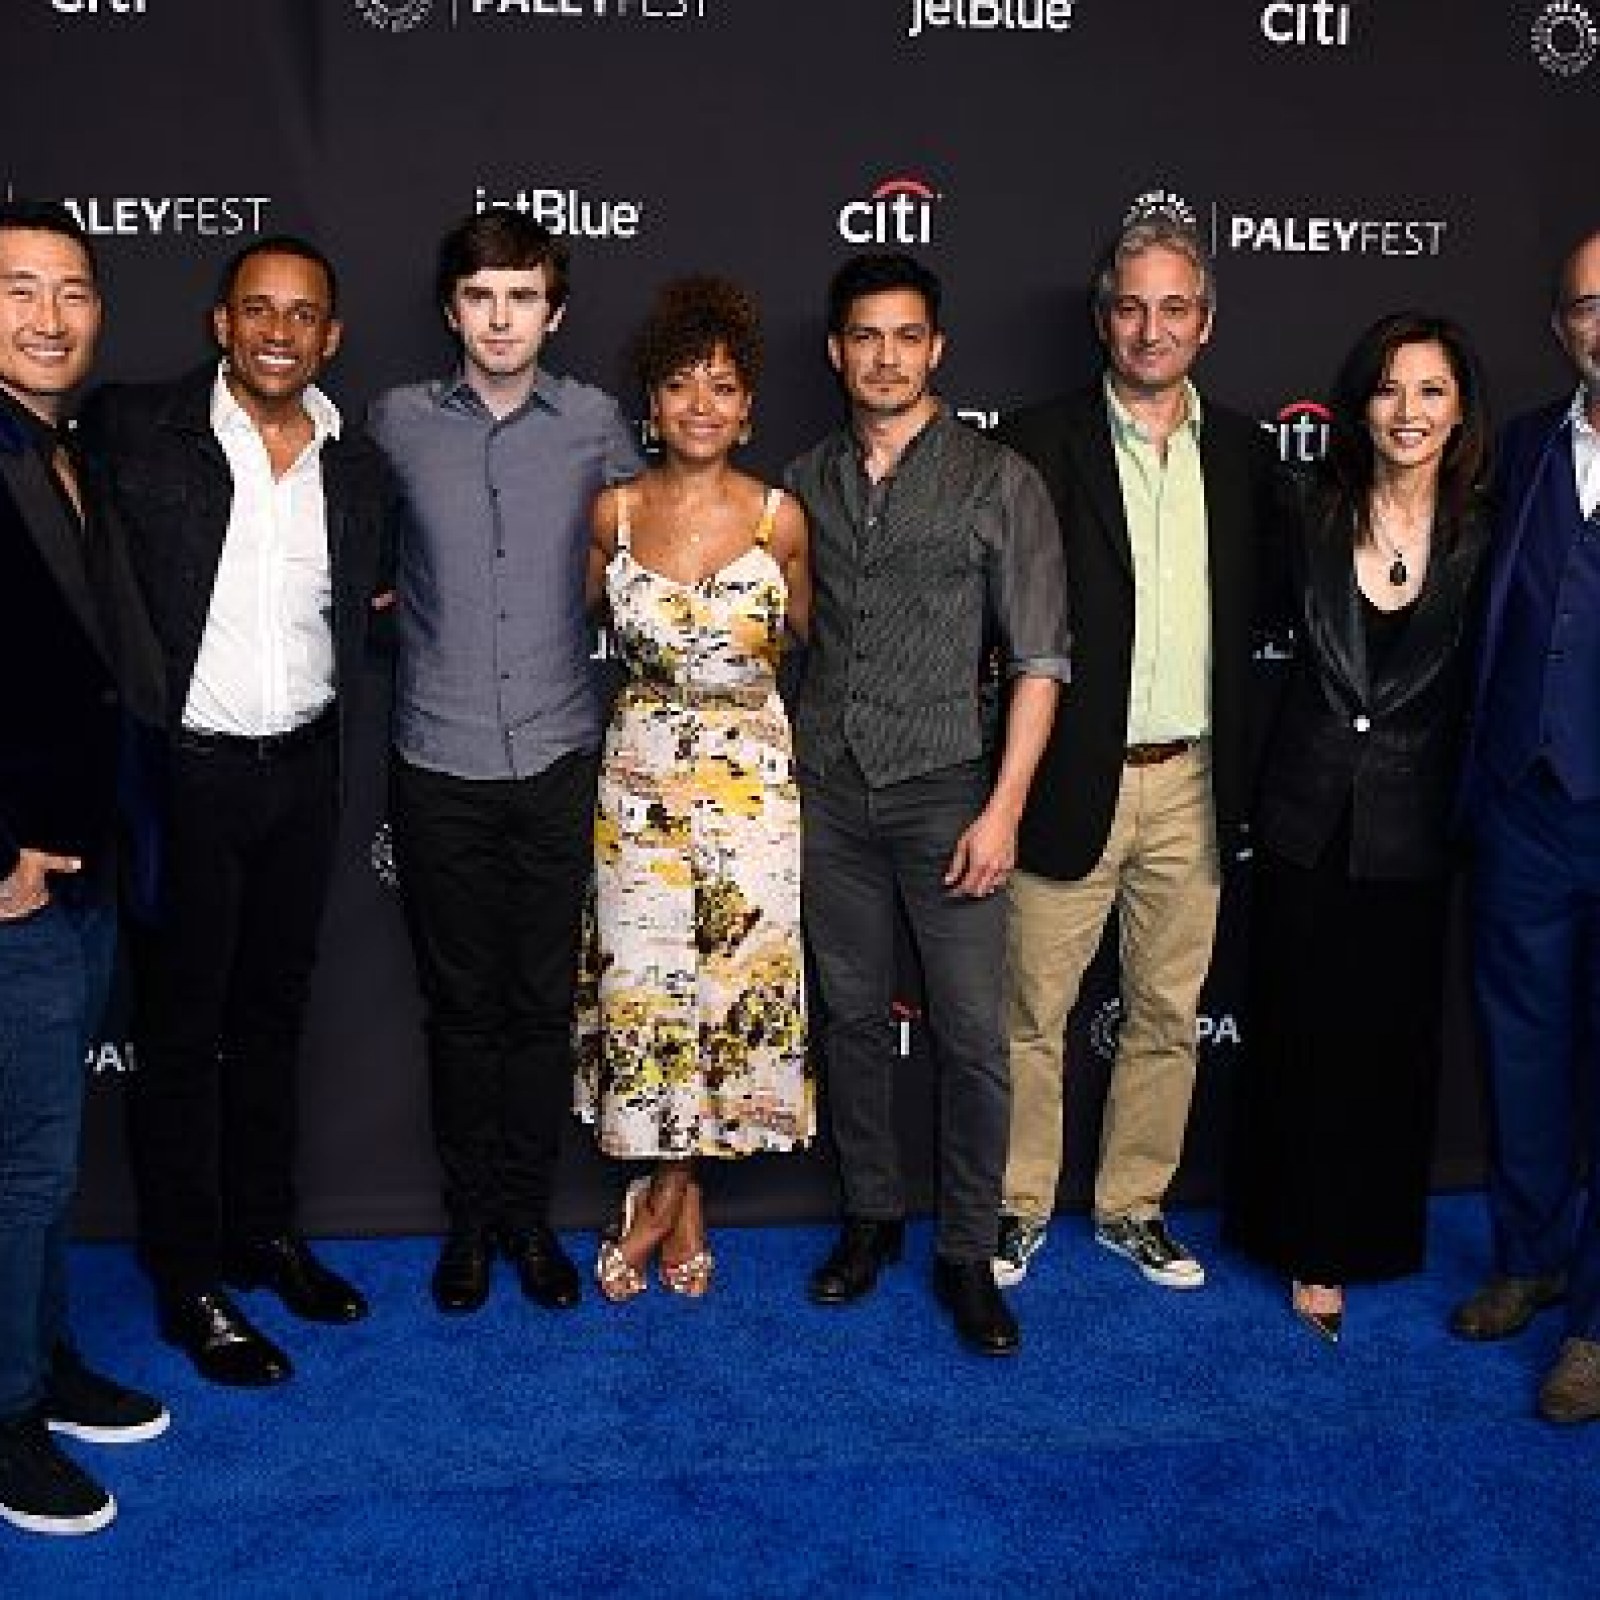 Cast of the good doctor